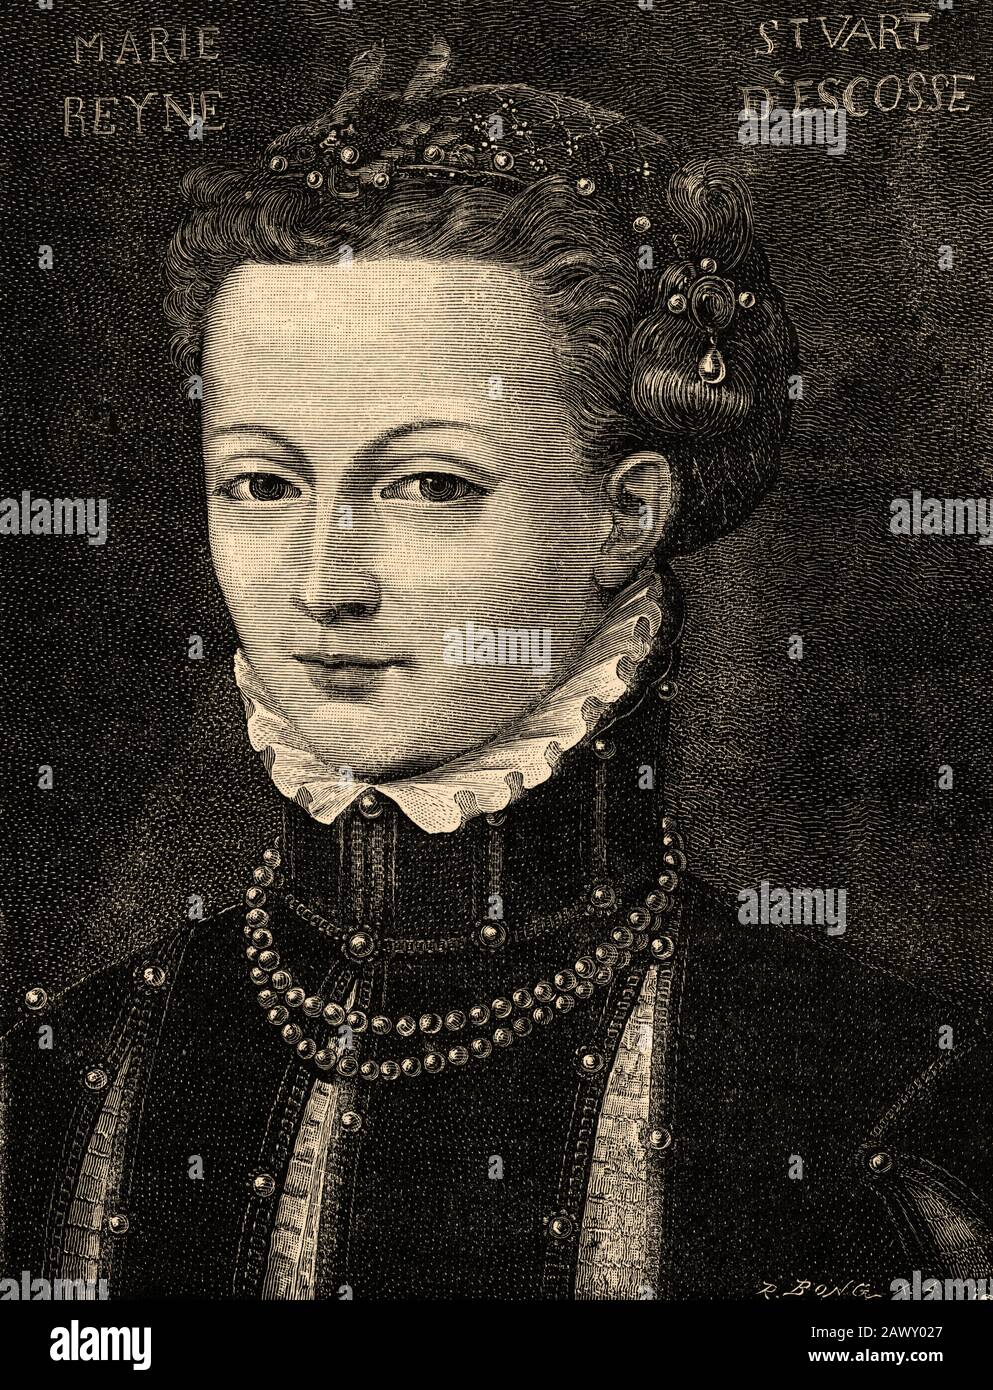 Portrait of Mary I, called Mary Stuart. Mary Stewart Marie Steuart, December 8, 1542 - February 8, 1587), was Queen of Scotland from December 14, 1542 Stock Photo